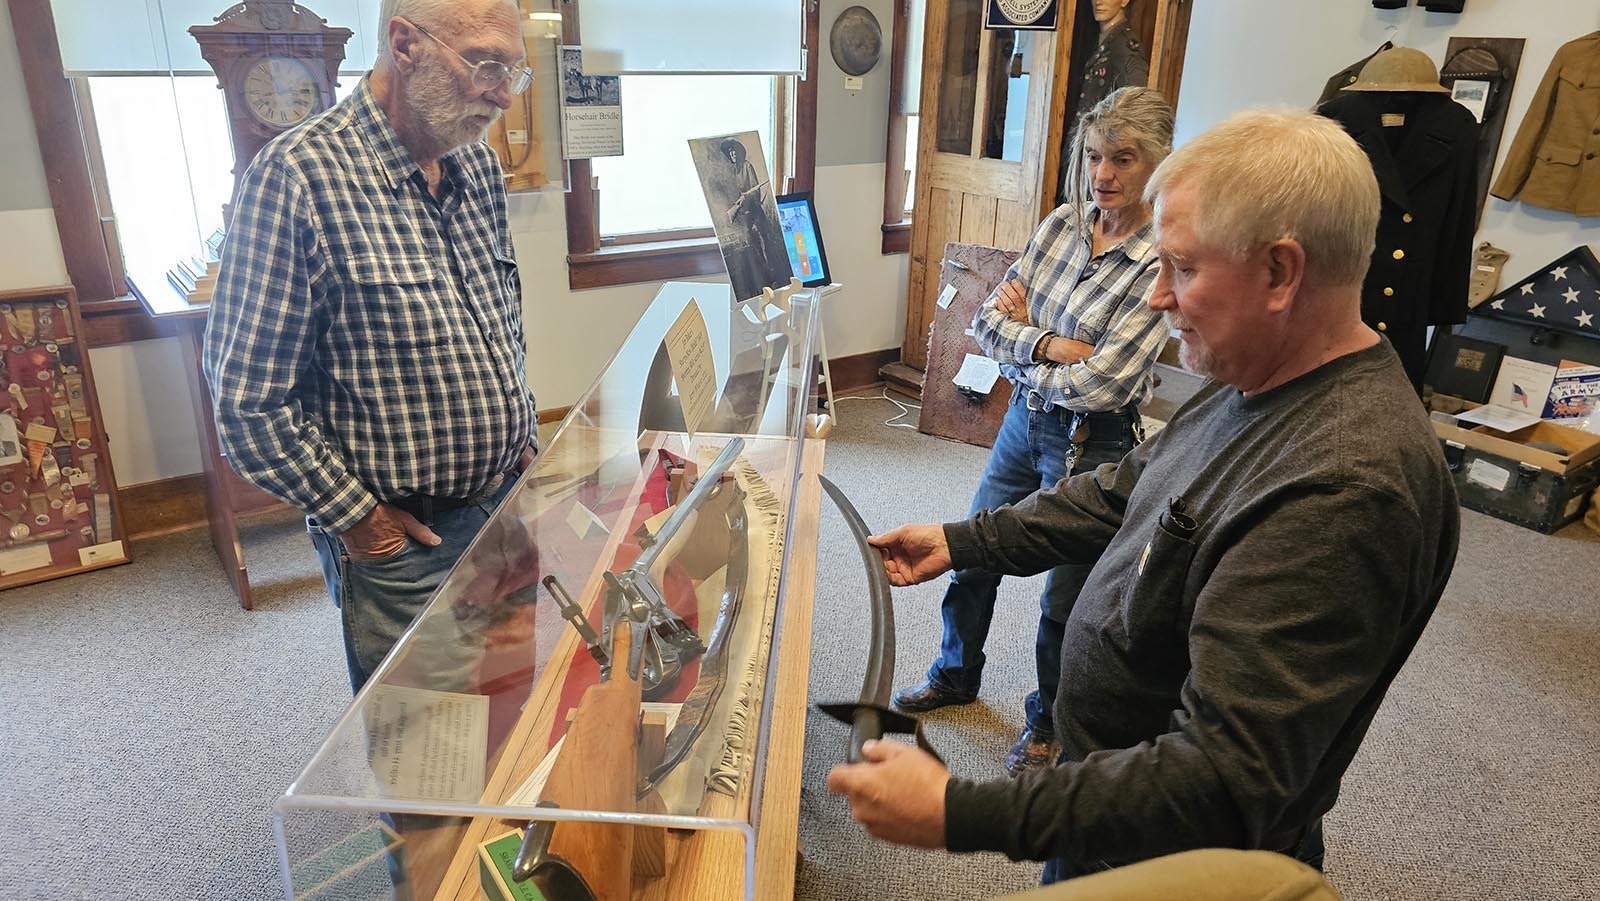 William Stocks, front, holds mountain man Jim Baker's sword up, demonstrating where it might be placed at the Little Snake River Museum, while LSR Museum board member Jim Roberts and LSR Museum Director Lela Emmons look on. Stocks has donated the sword to the museum, where it will join other Baker items on display.